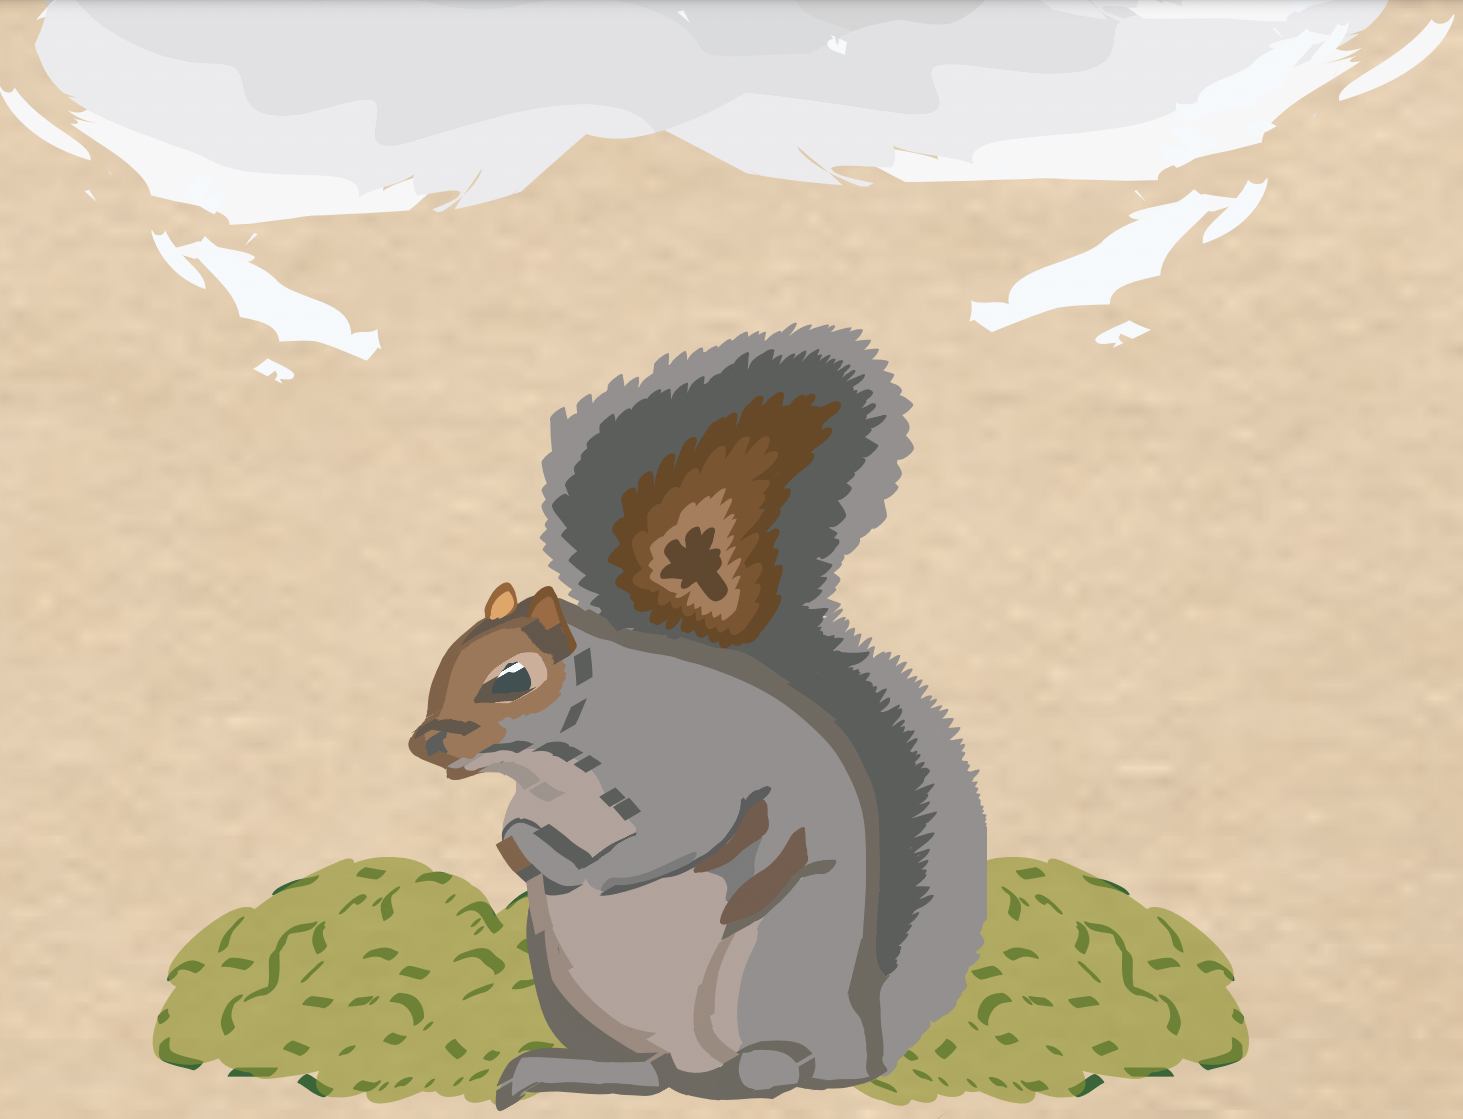 Colored+illustration+of+a+grey+and+brown+squirrel+sitting+atop+a+pile+of+leaves.